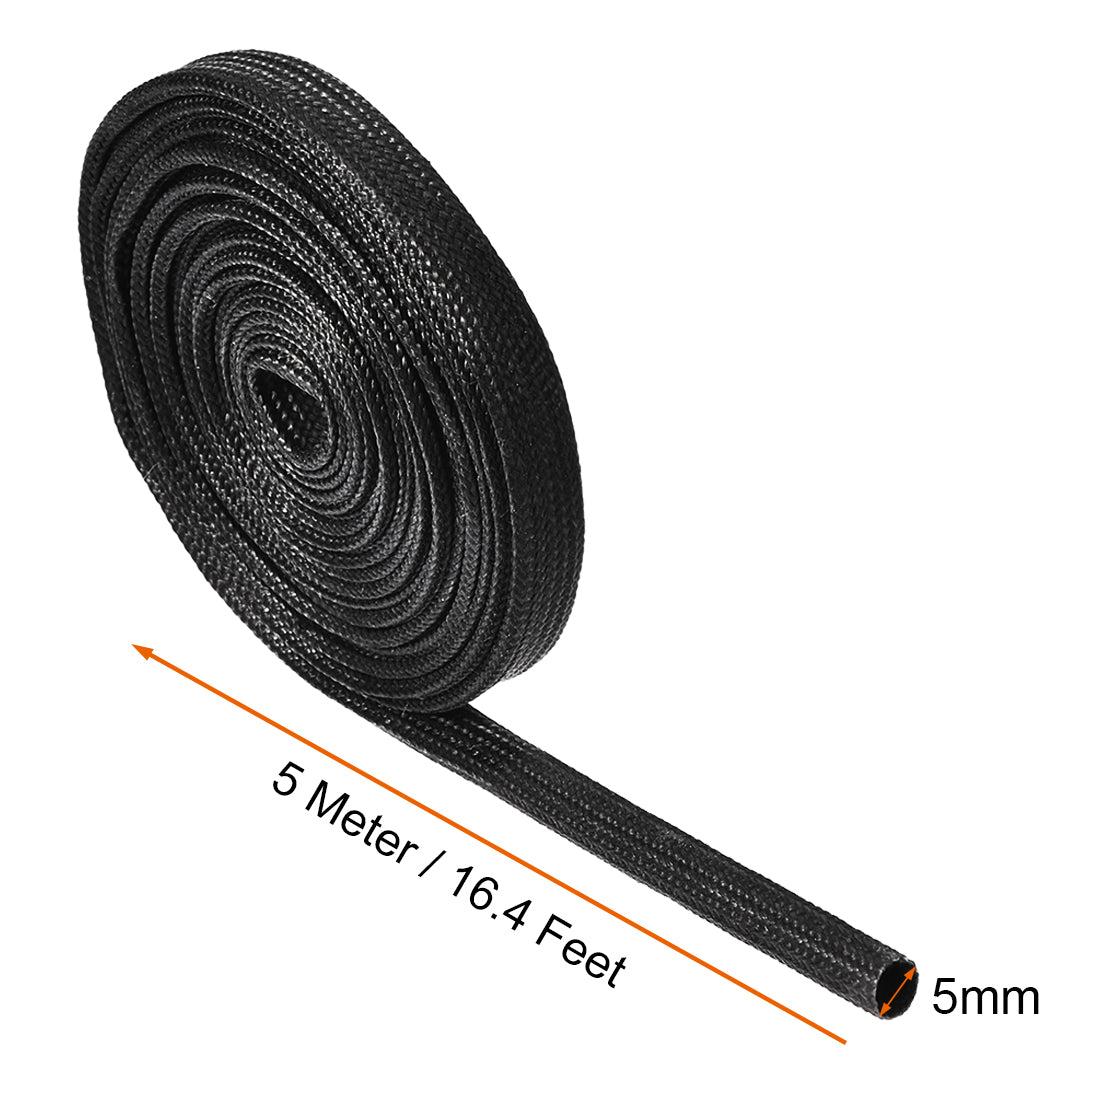 uxcell Uxcell Insulation Cable Protector,16.4Ft-5mm High TEMP Silicone Fiberglass Sleeve Black